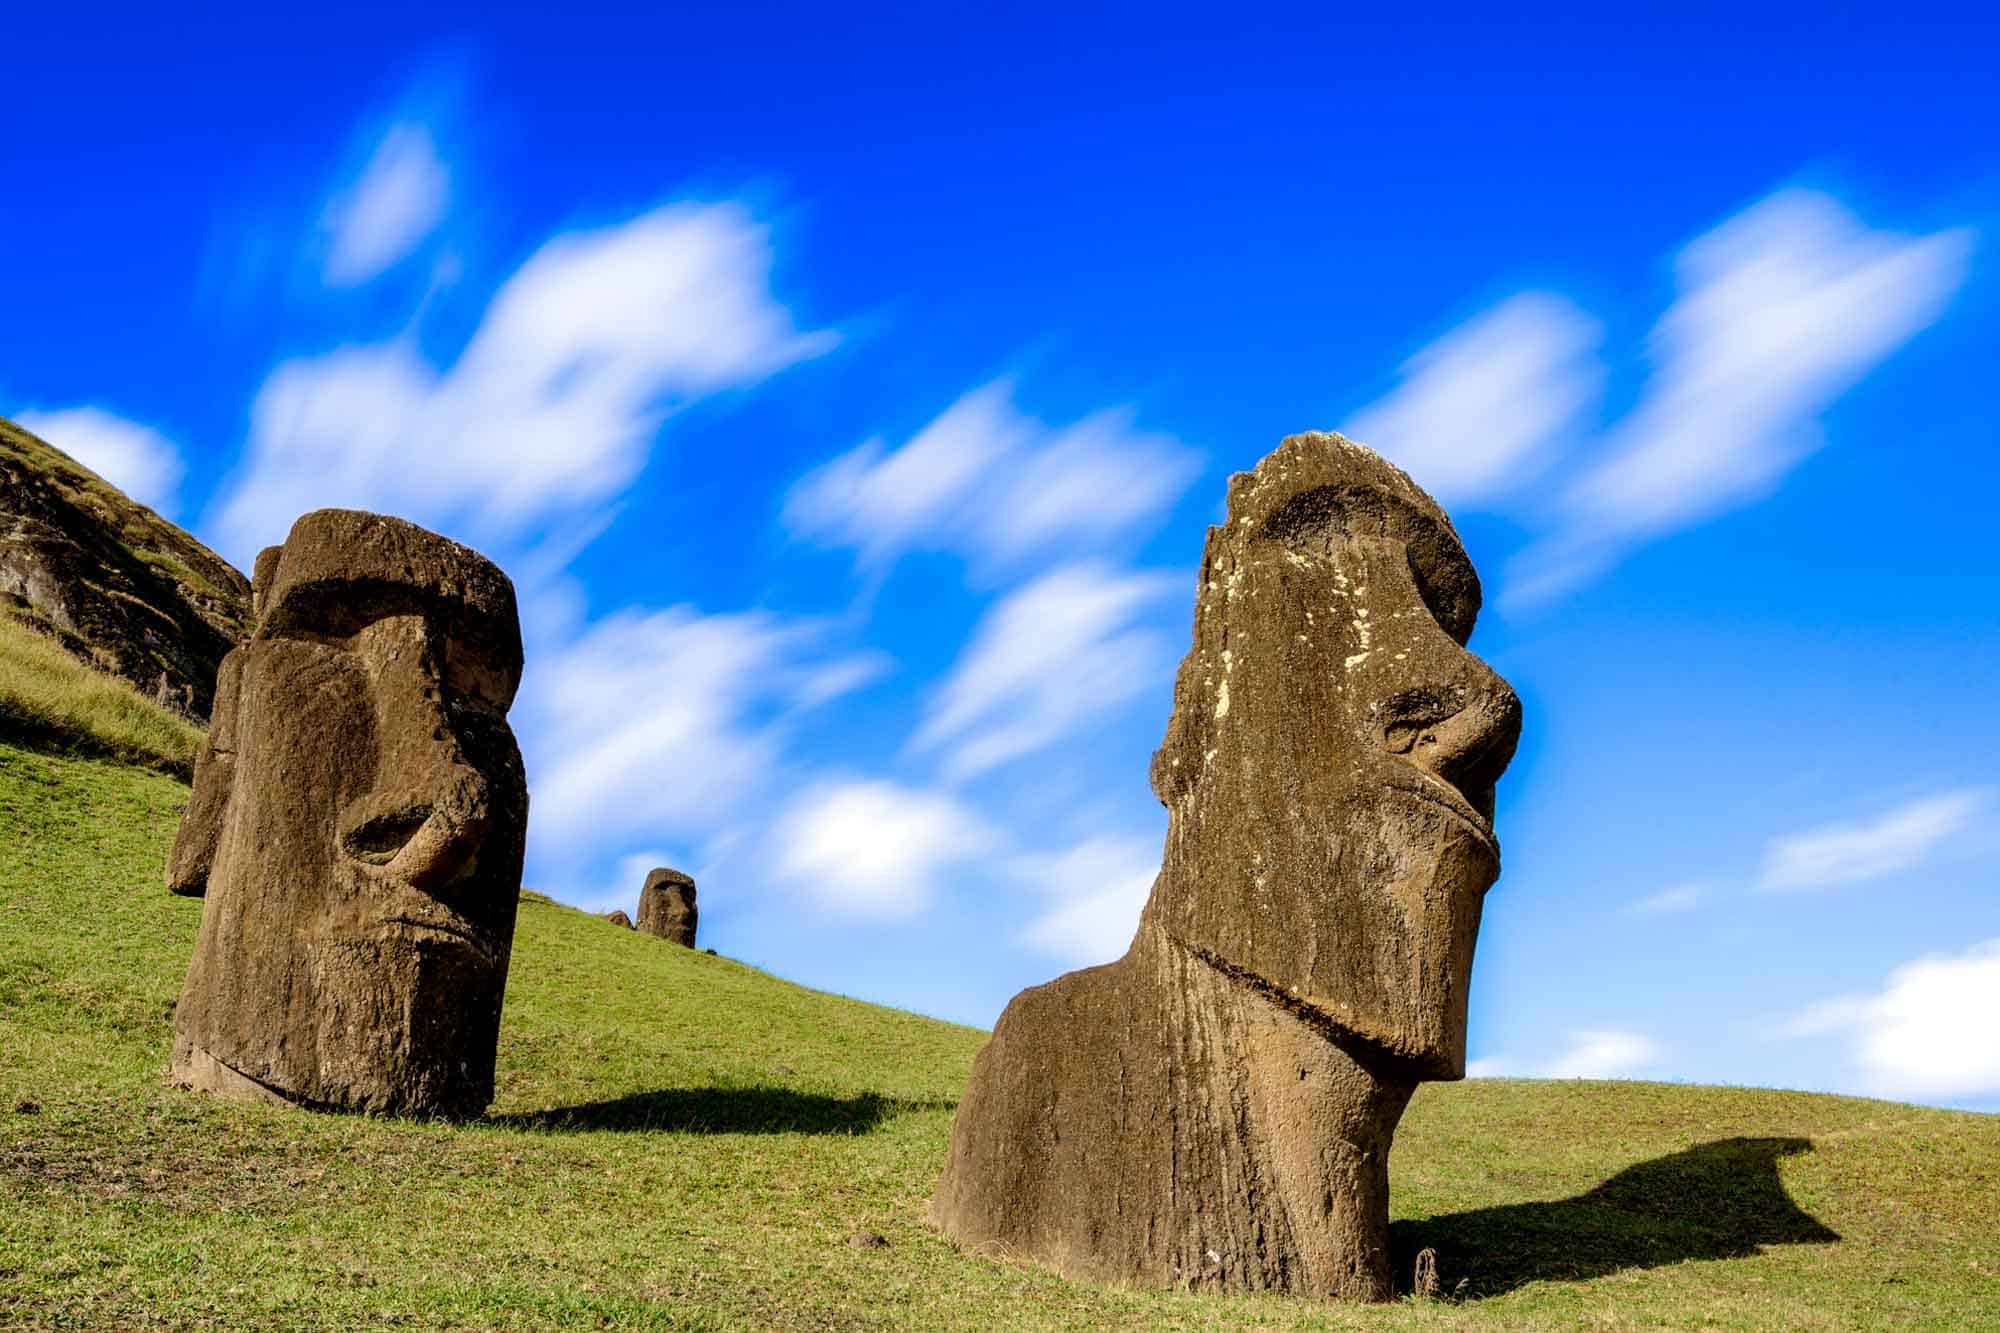 30 EPIC Things to Do in Easter Island (2021 Guide)